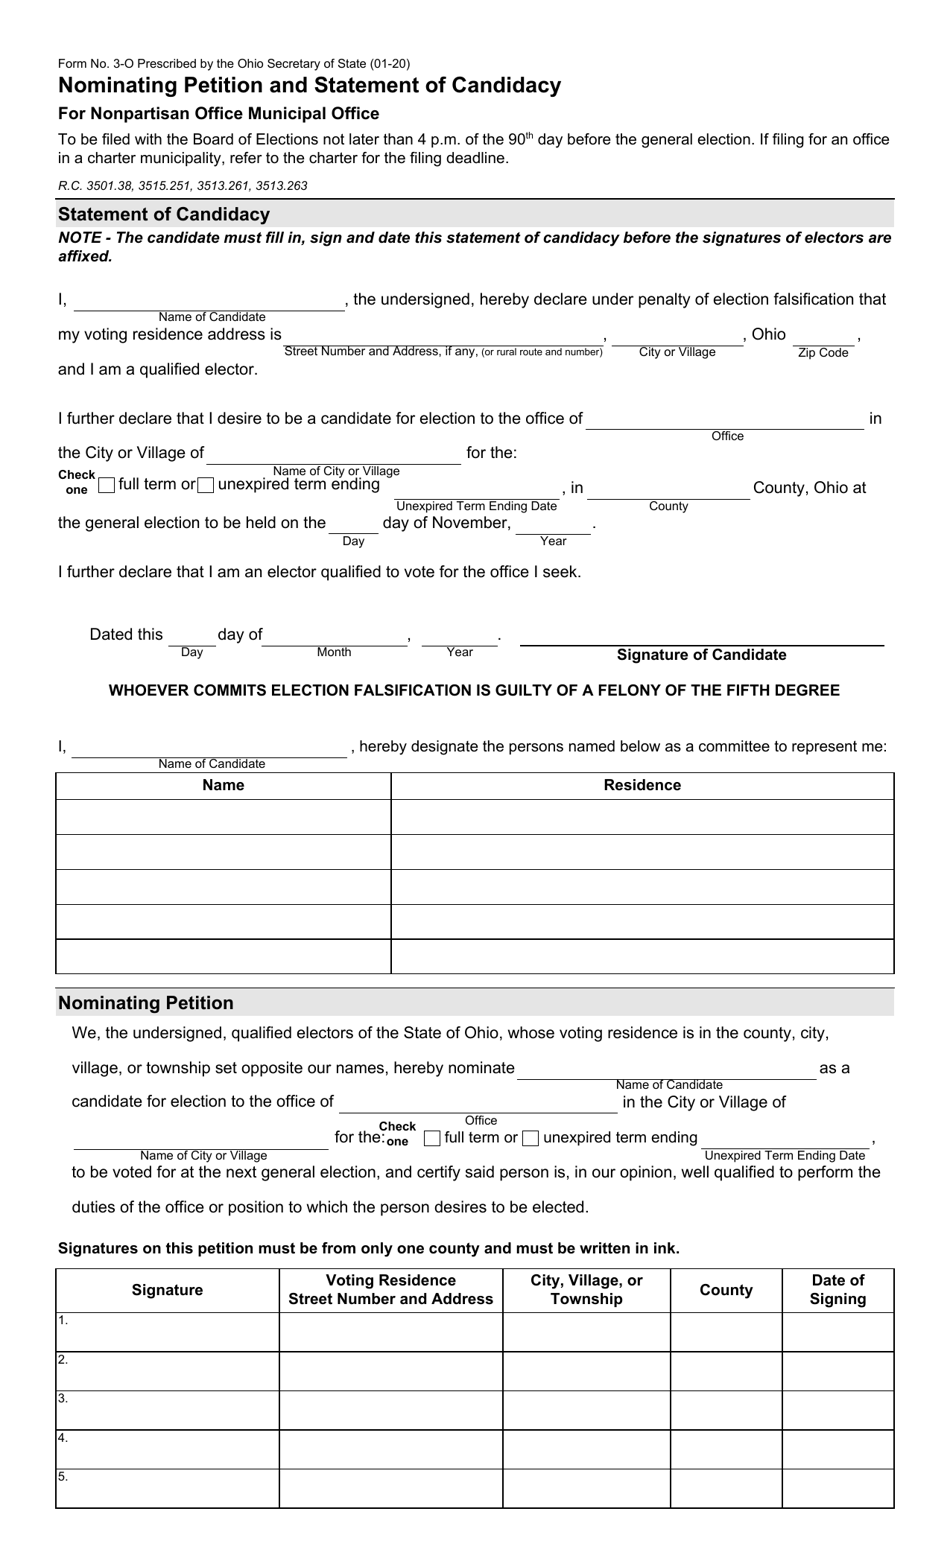 Form 3-O Nominating Petition and Statement of Candidacy for Nonpartisan Office Munucipial Office - Ohio, Page 1